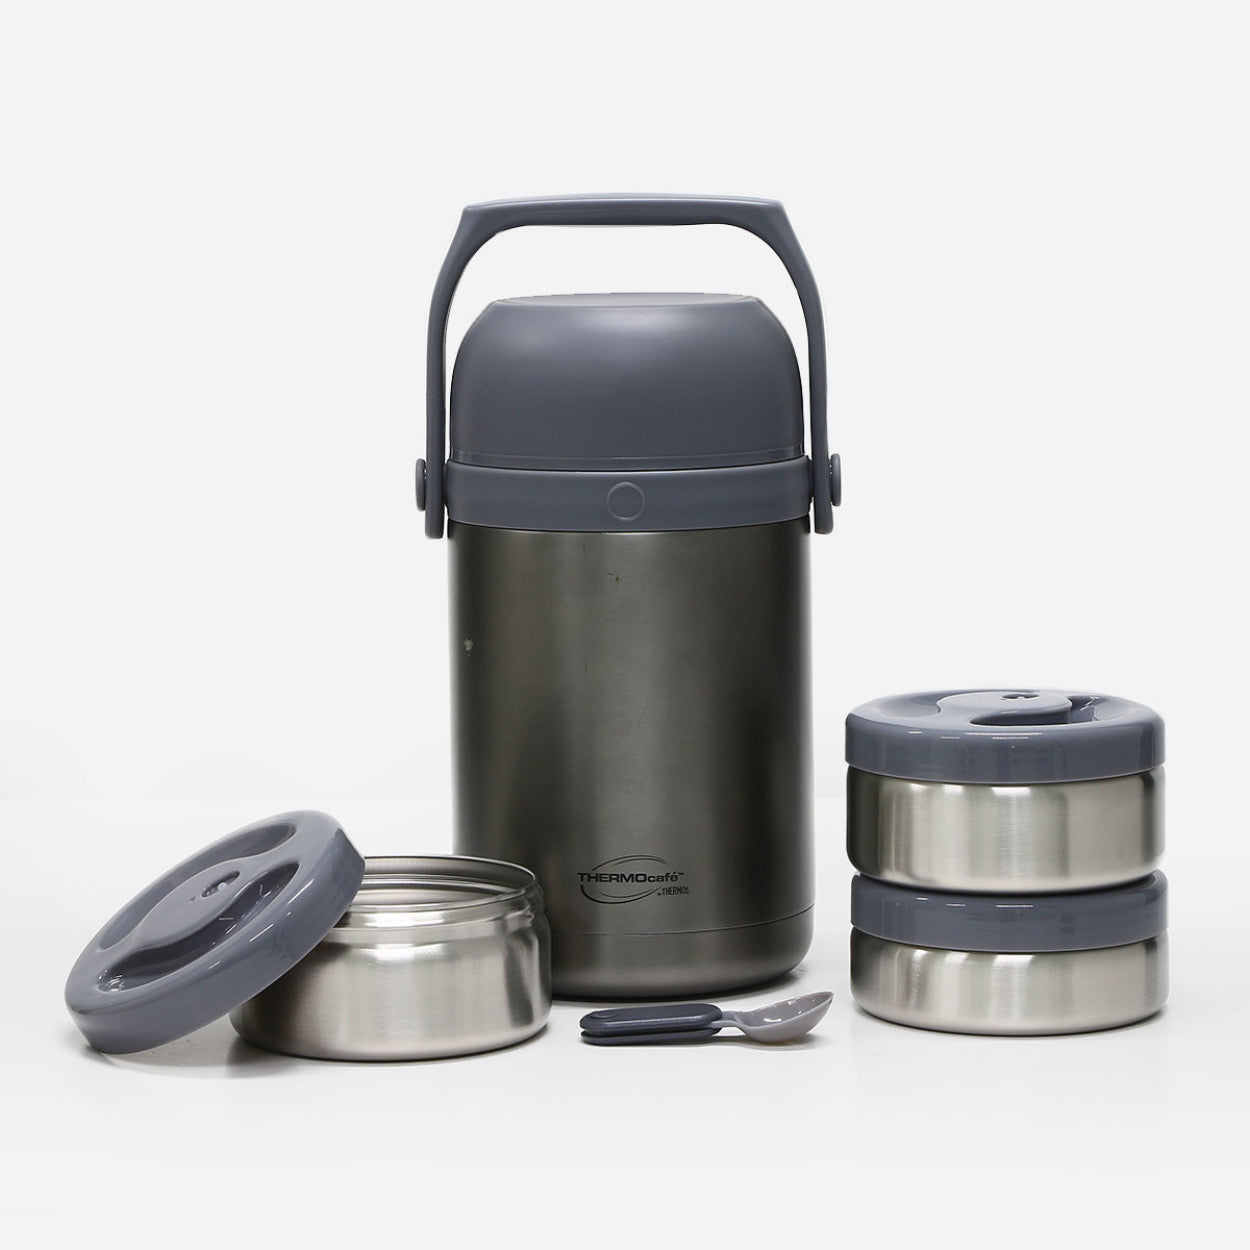 https://cdn.shopify.com/s/files/1/0450/5265/7817/products/THERMOS_20LUNCHSET_20TIFILO1800_20CGY_20-_2039214989-1.jpg?v=1693527085